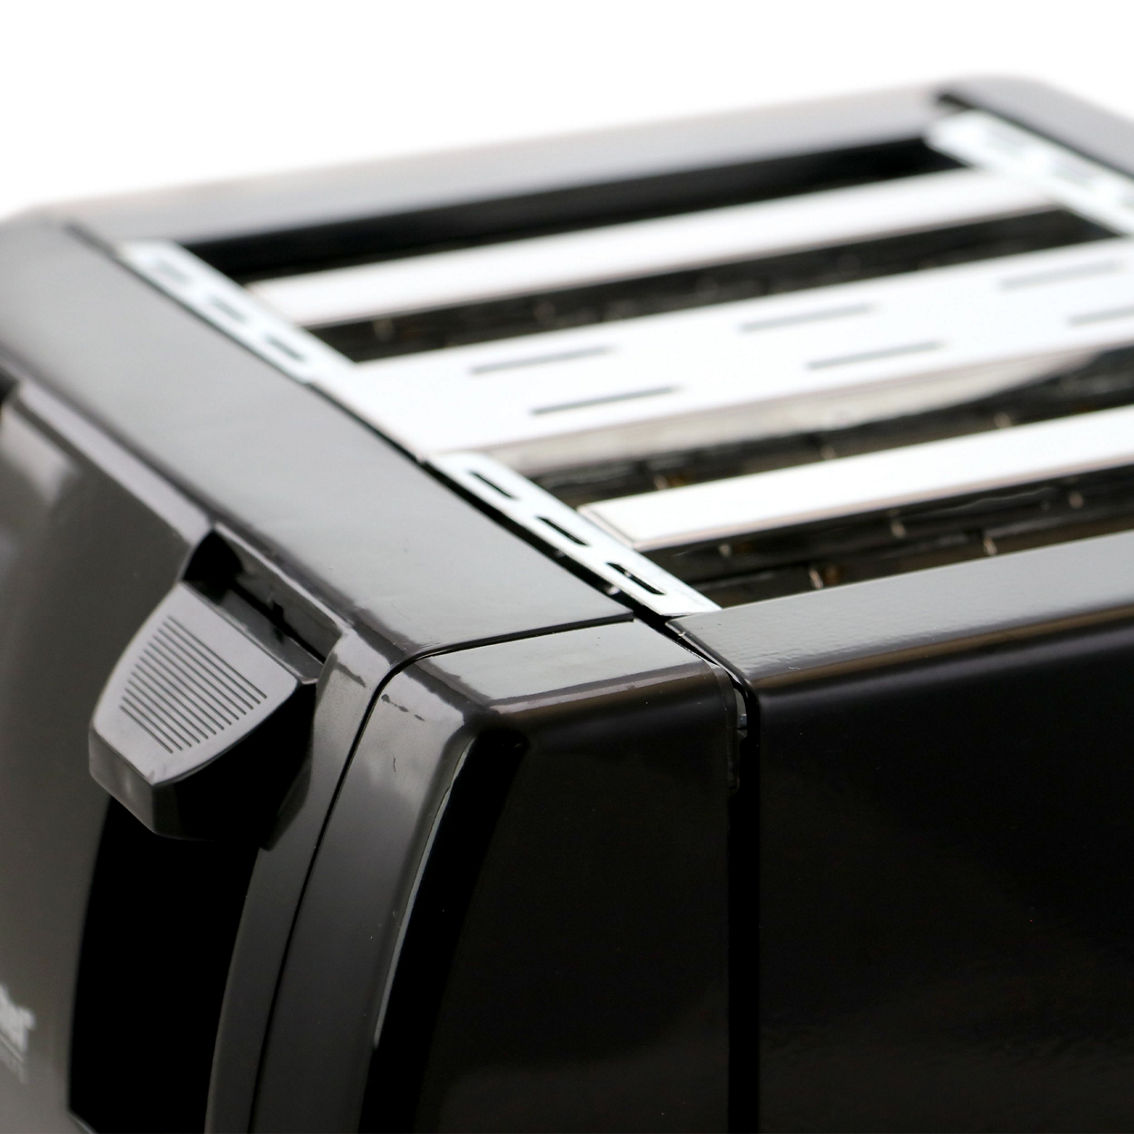 Better Chef 4 Slice Dual Control Toaster in Black - Image 4 of 5